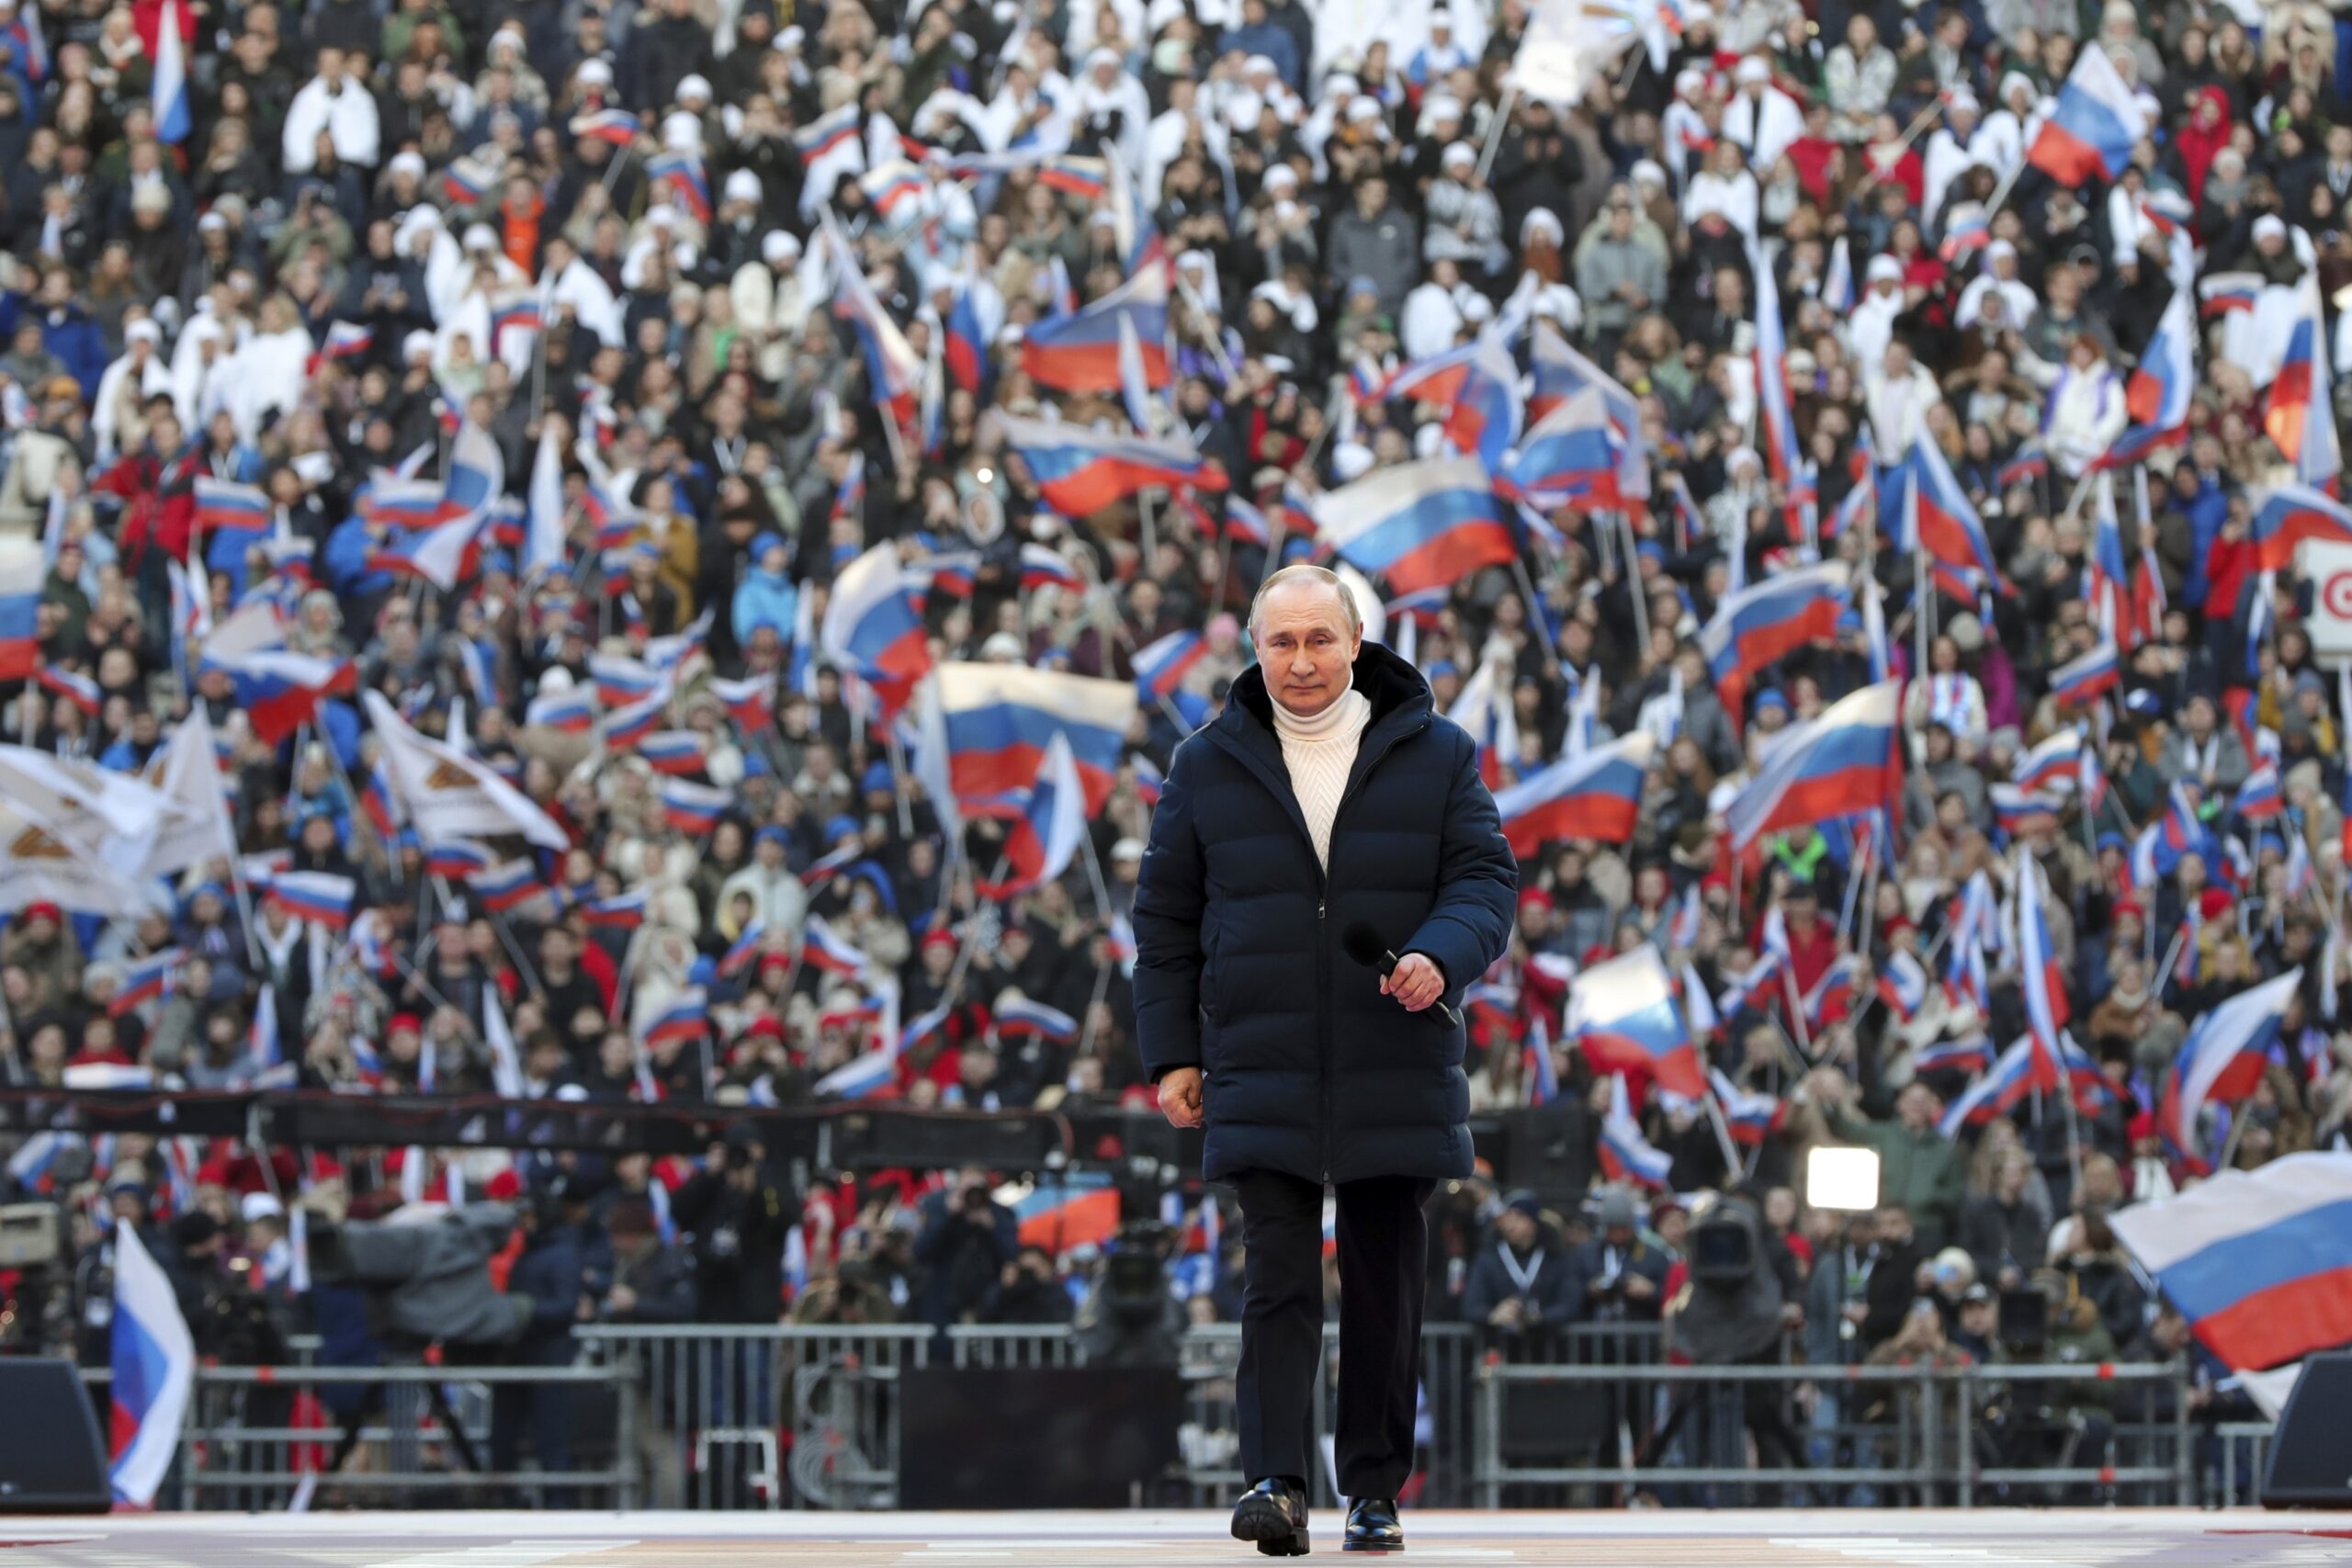 Russian President Vladimir Putin arrives to deliver his speech at the concert marking the eighth anniversary of the referendum on the state status of Crimea and Sevastopol and its reunification with Russia, in Moscow, Russia, Friday, March 18, 2022. (Mikhail Klimentyev, Sputnik, Kremlin Pool Photo via AP)